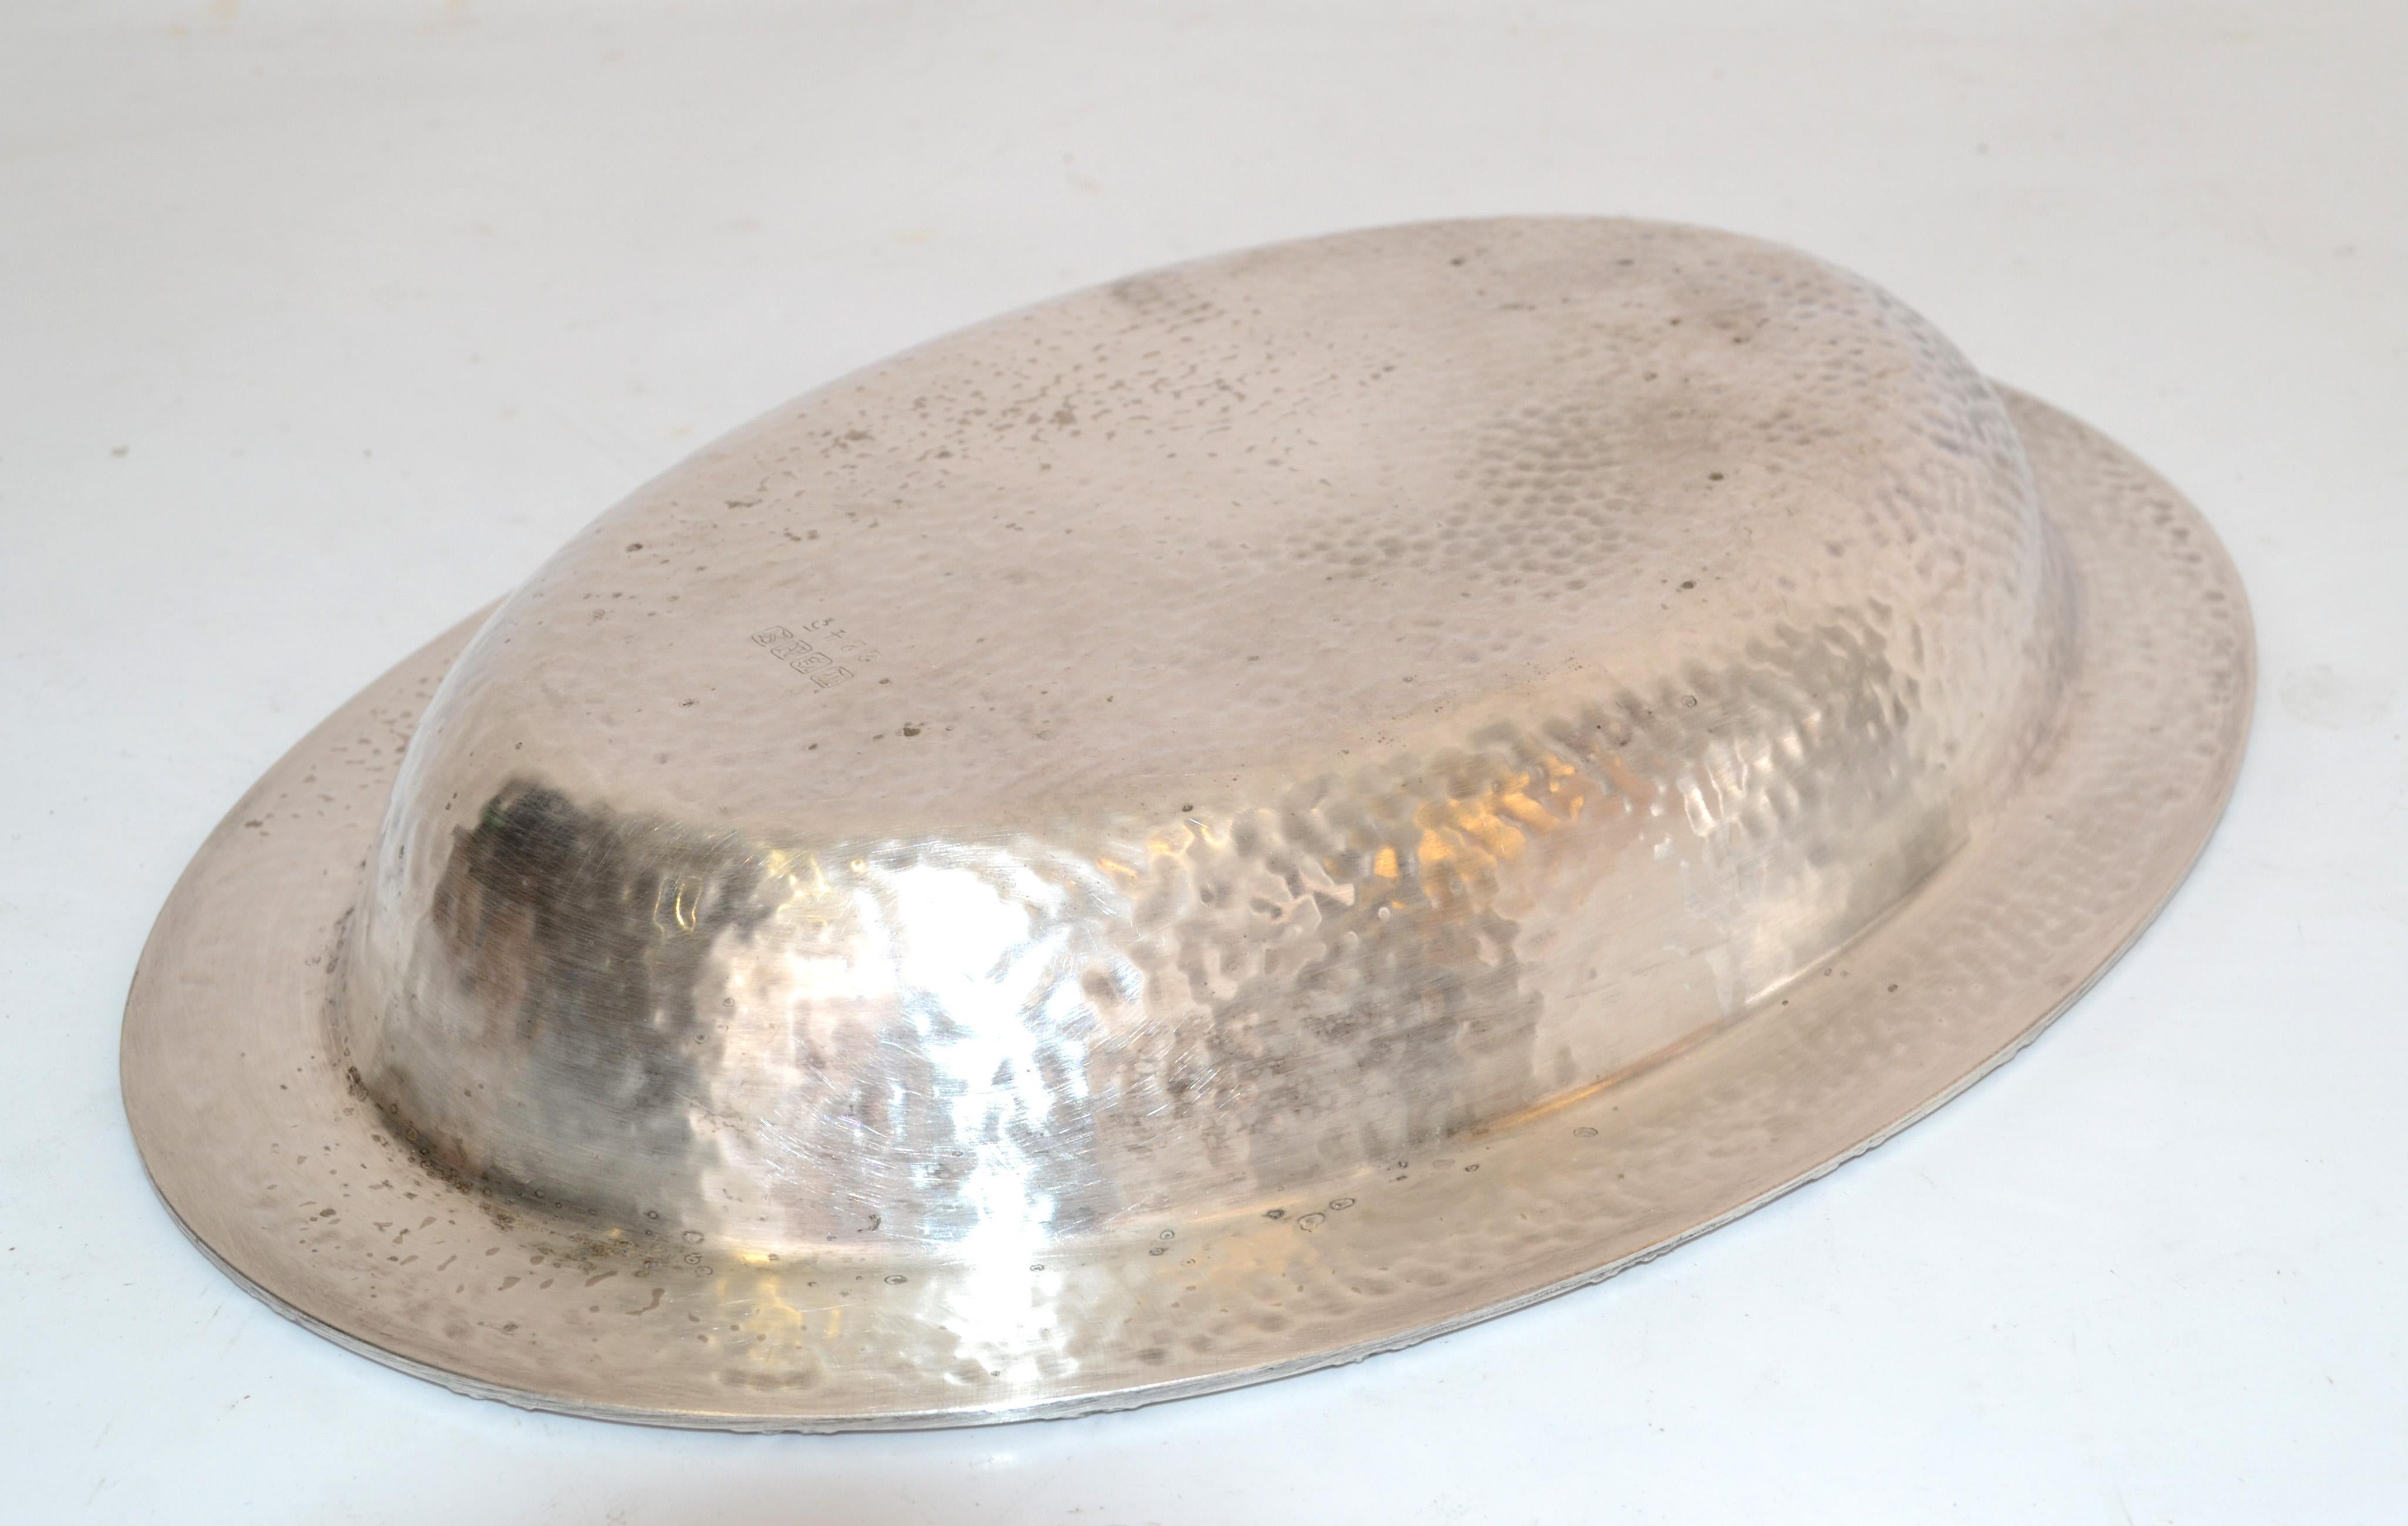 Art Deco 1969 Hand-Hammered Silver Plate EPNS 2245 Centerpiece Decorative Bowl For Sale 6